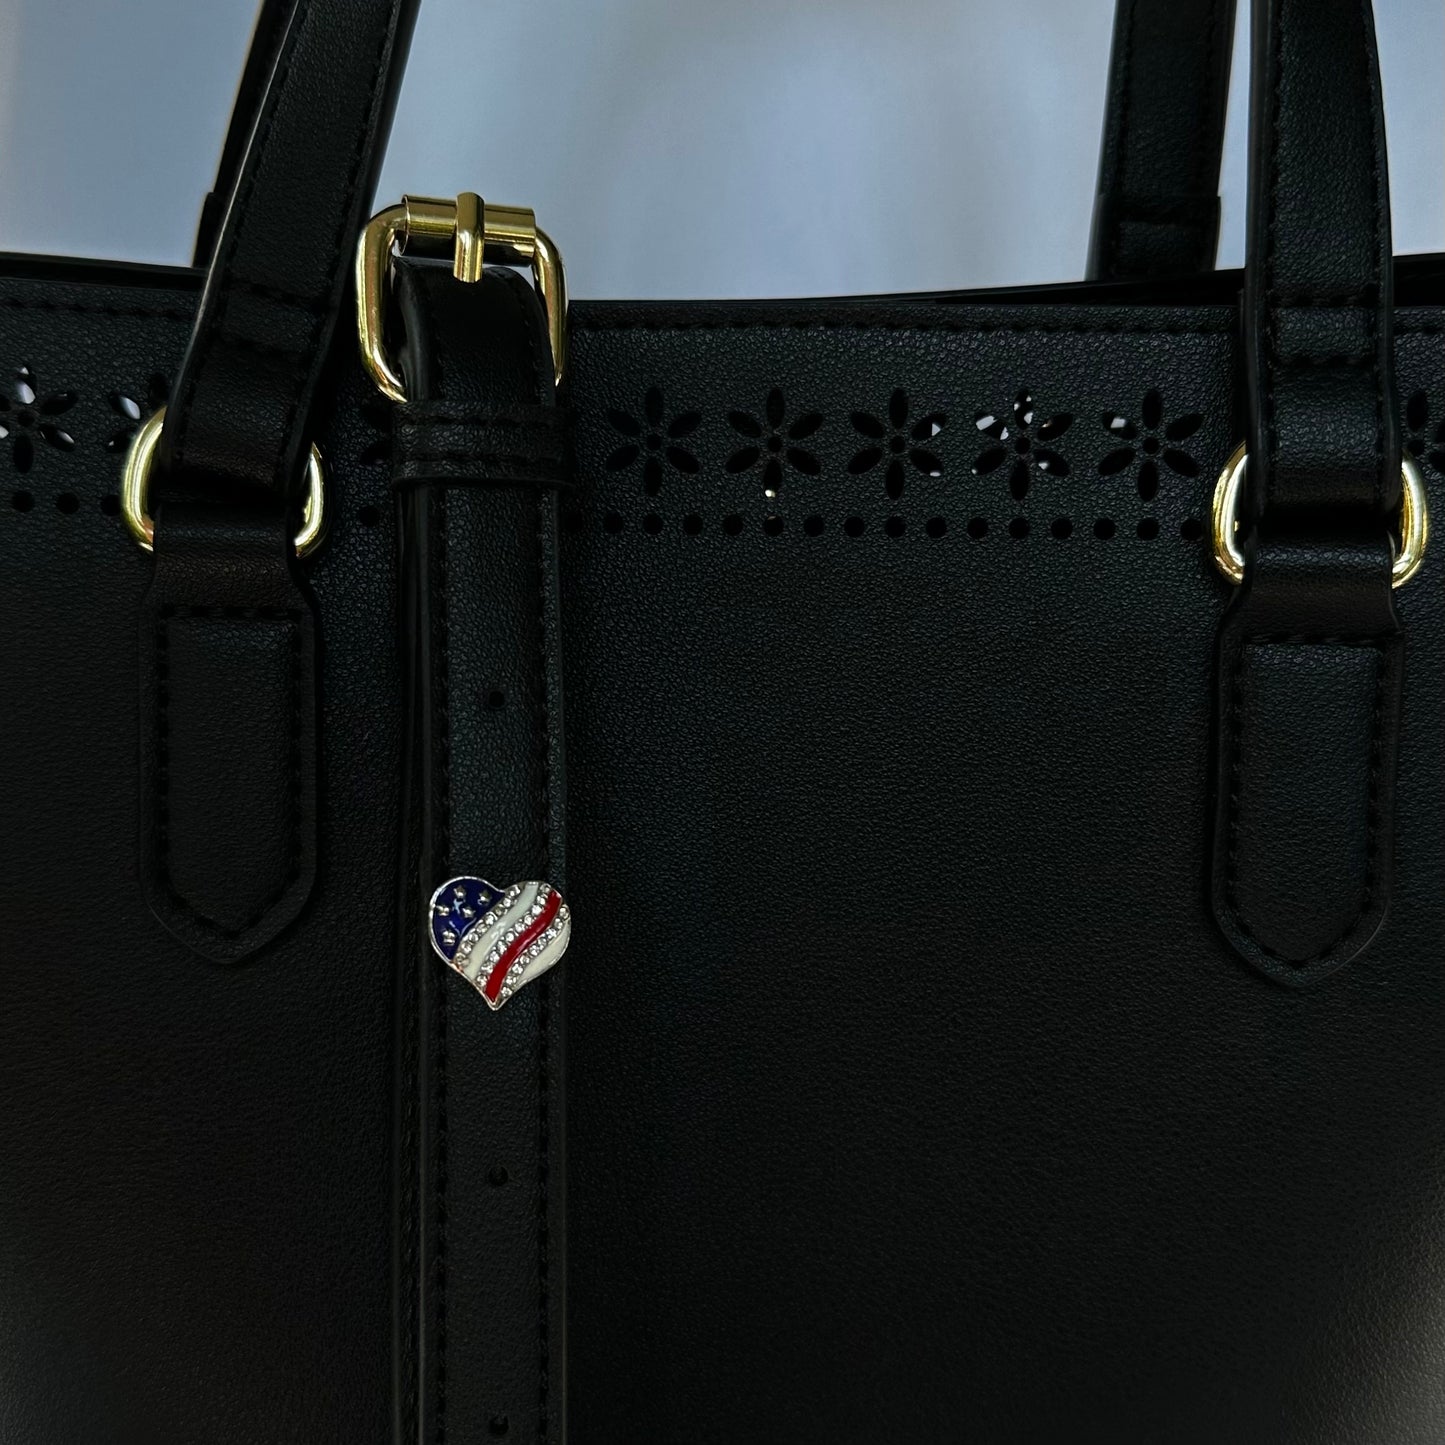 Heart Red, White and Blue Belt and Bag Charm